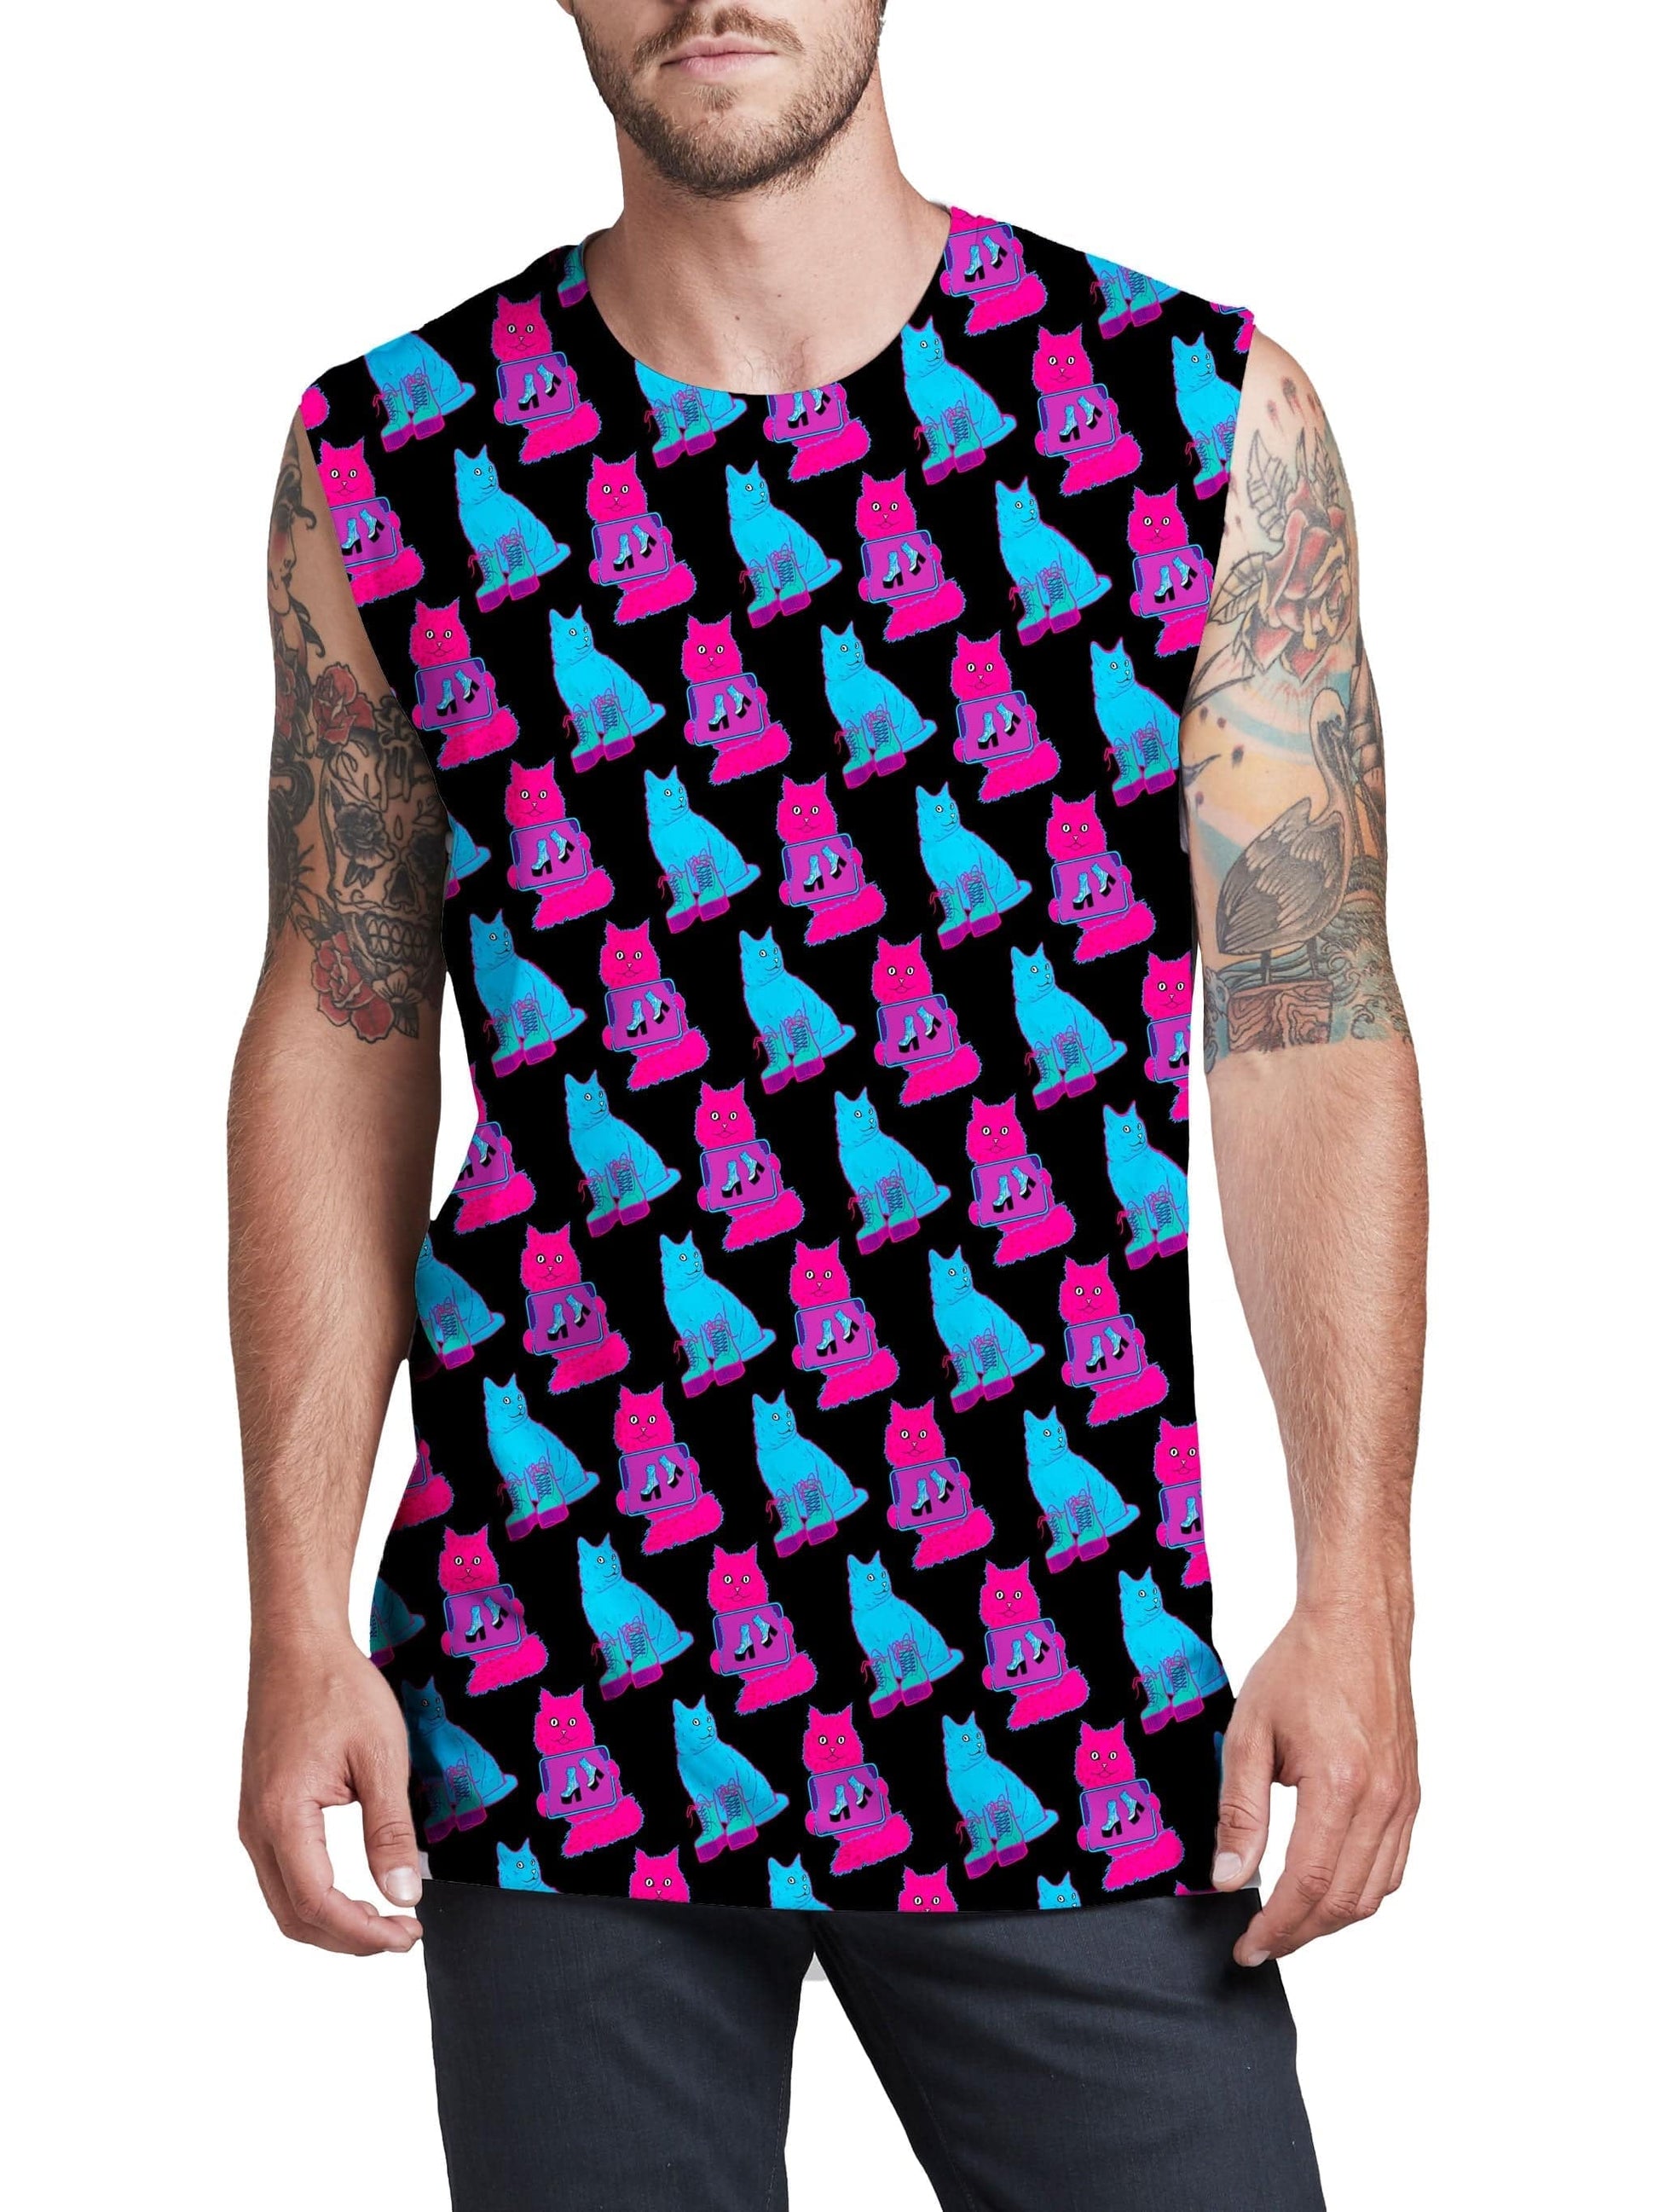 Boots N Cats Men's Muscle Tank, Noctum X Truth, | iEDM